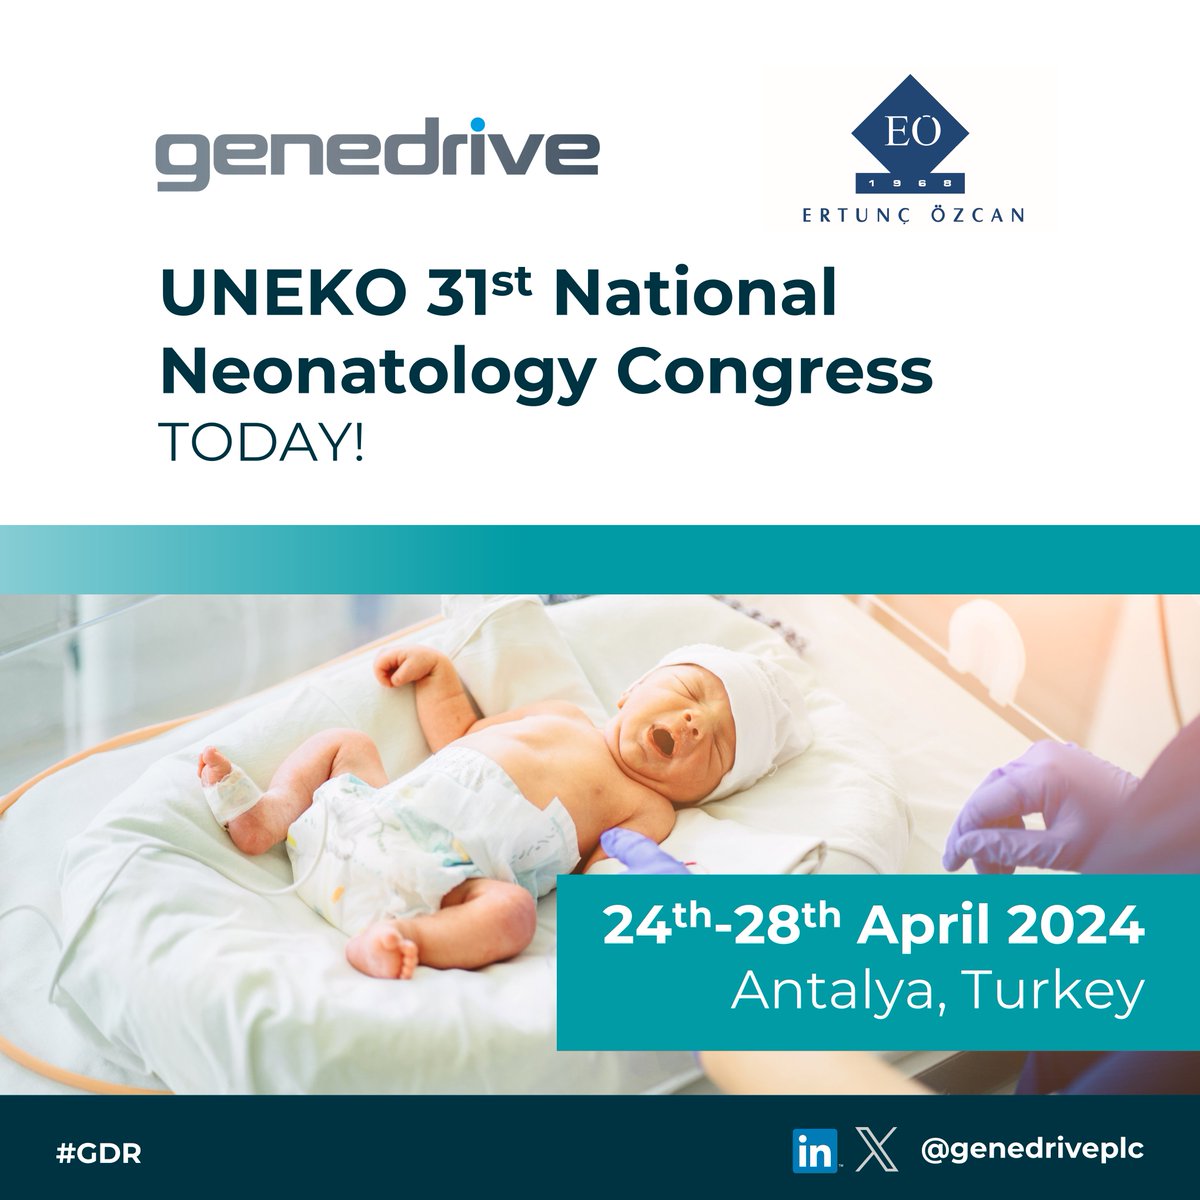 ☀ It's DAY 1 of the 31st UNEKO National Neonatology Congress in Antalya, Turkey!

👋 Catch Andrew Burns on the @ERTUNCOZCAN   stand to learn about the Genedrive MT-RNR1 ID Kit.

#GDR #POCT #pointofcare #diagnostics #medtech  #healthcare  #pharmacogenomics #antibioticresistance